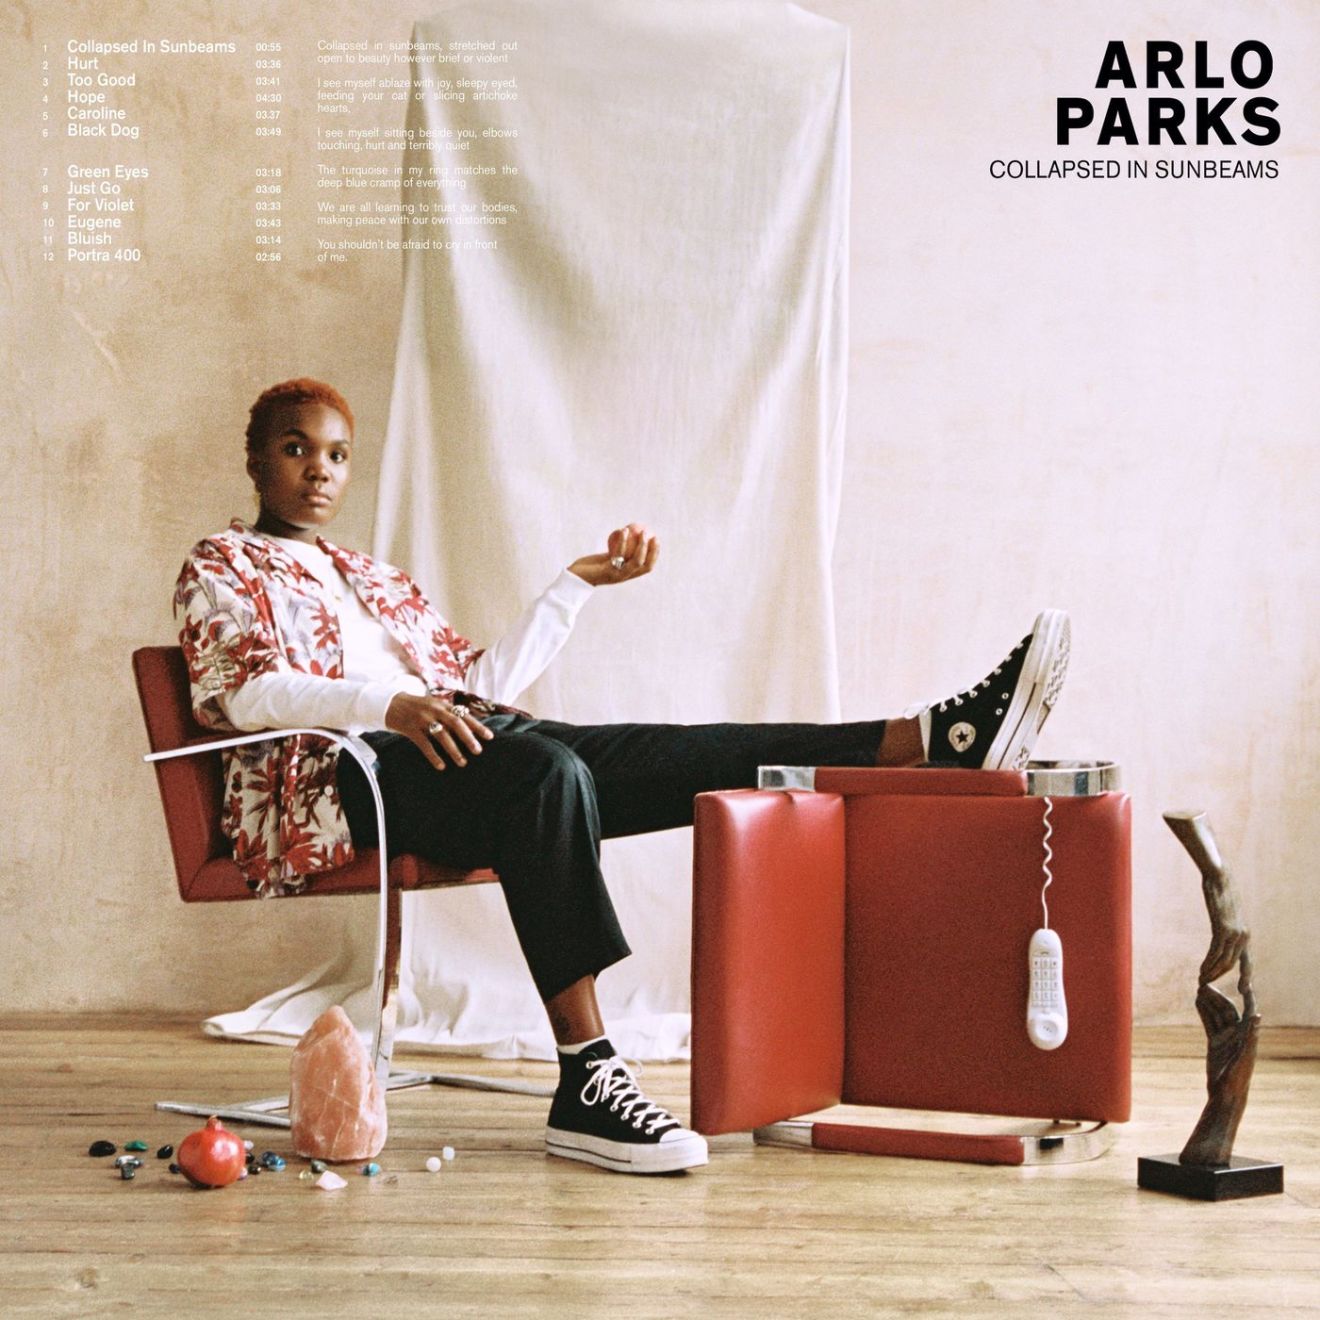 Arlo Parks’ ‘Collapsed in Sunbeams (Deluxe)’ delivers a call to serenity